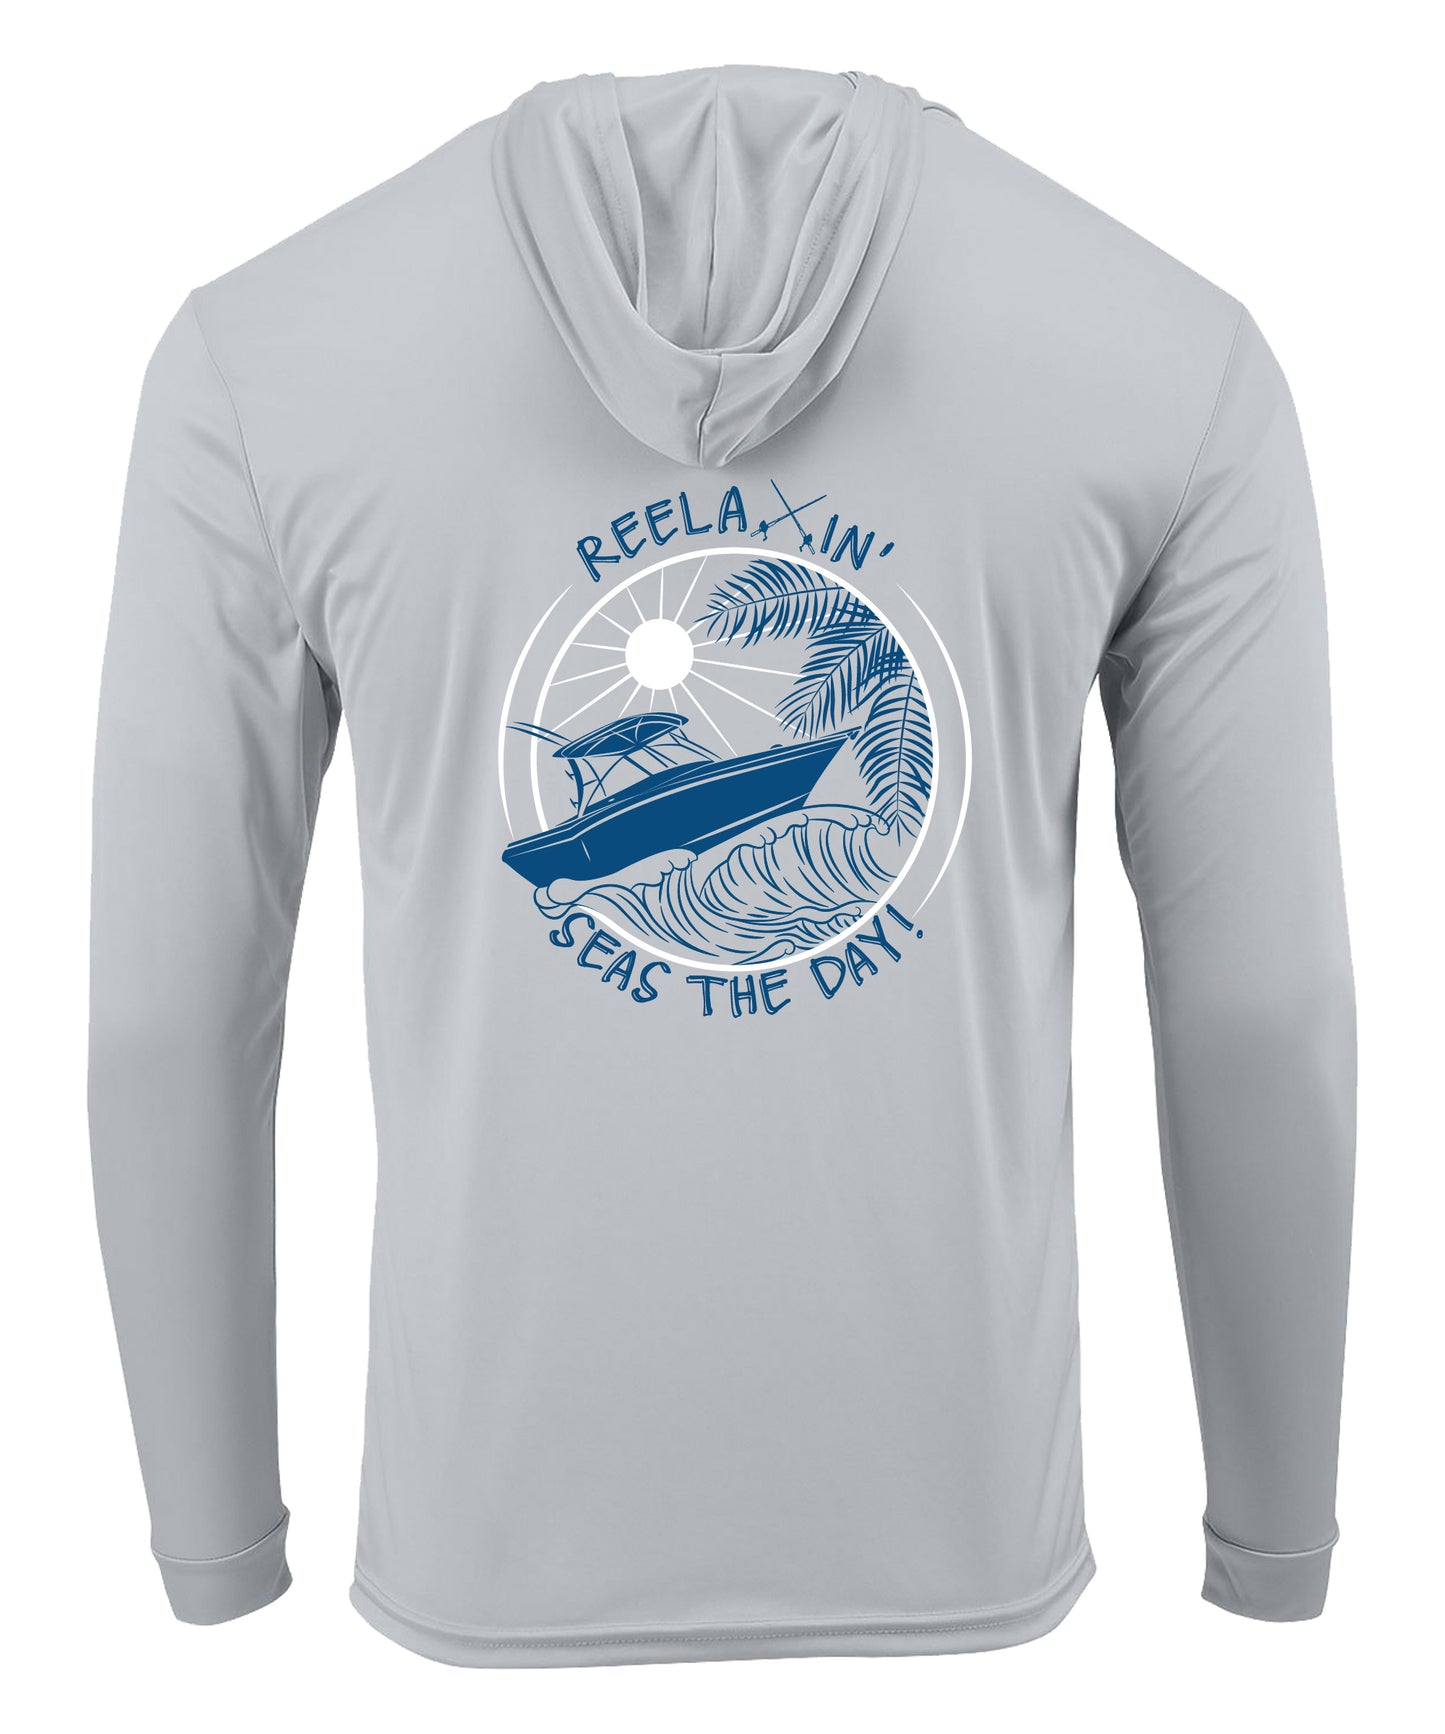 Reelaxin' -Seas the Day Performance Hoodie Dry-fit Long Sleeve - Light Gray